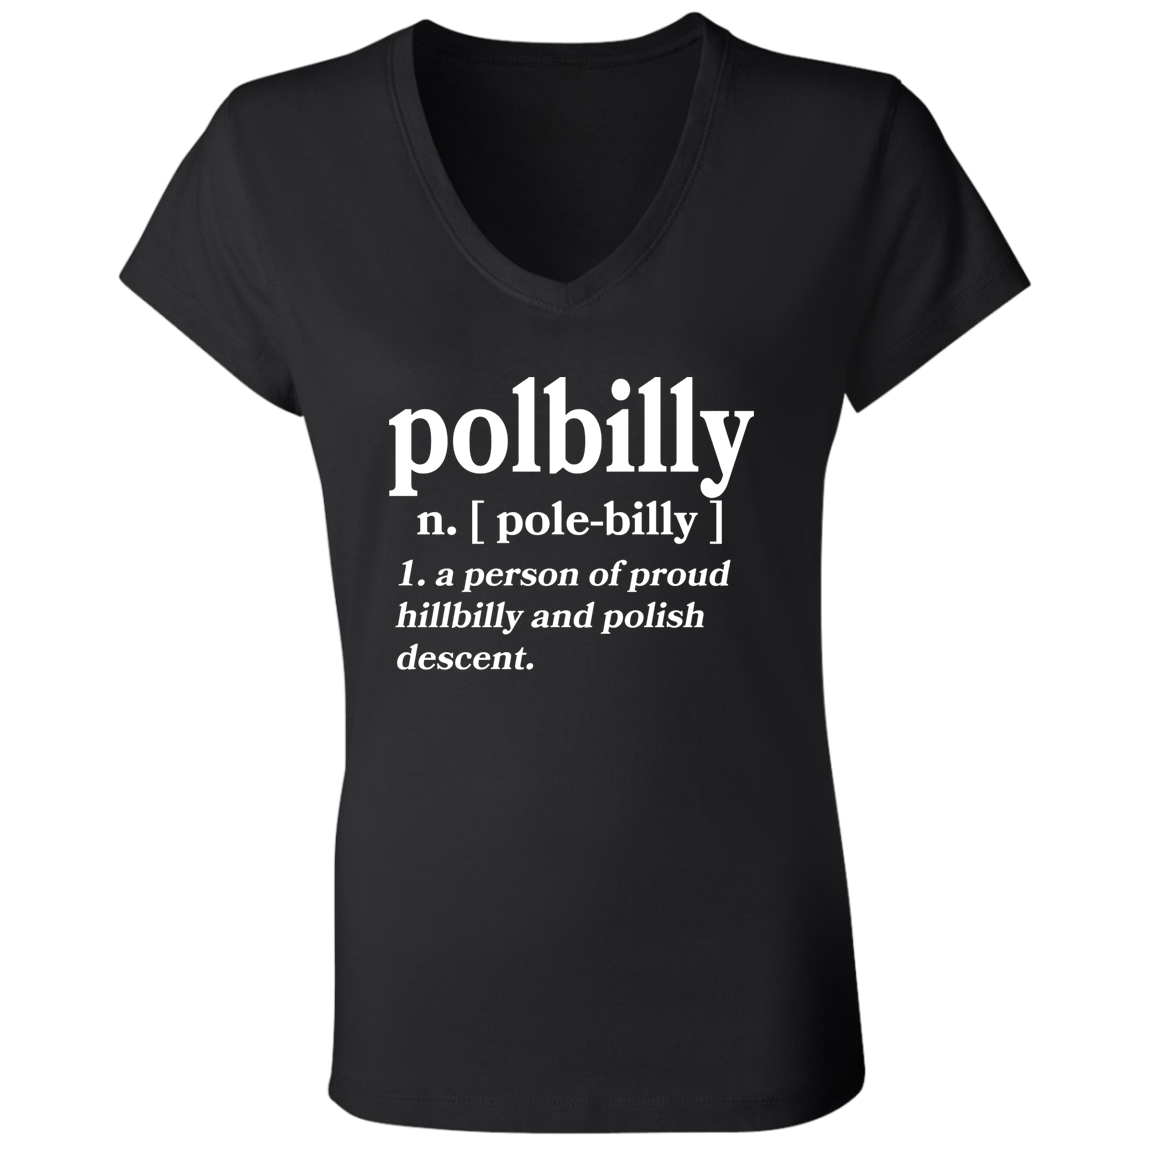 PolBIlly A Person Of Hillbilly And Polish Descent Apparel CustomCat B6005 Ladies' Jersey V-Neck T-Shirt Black S